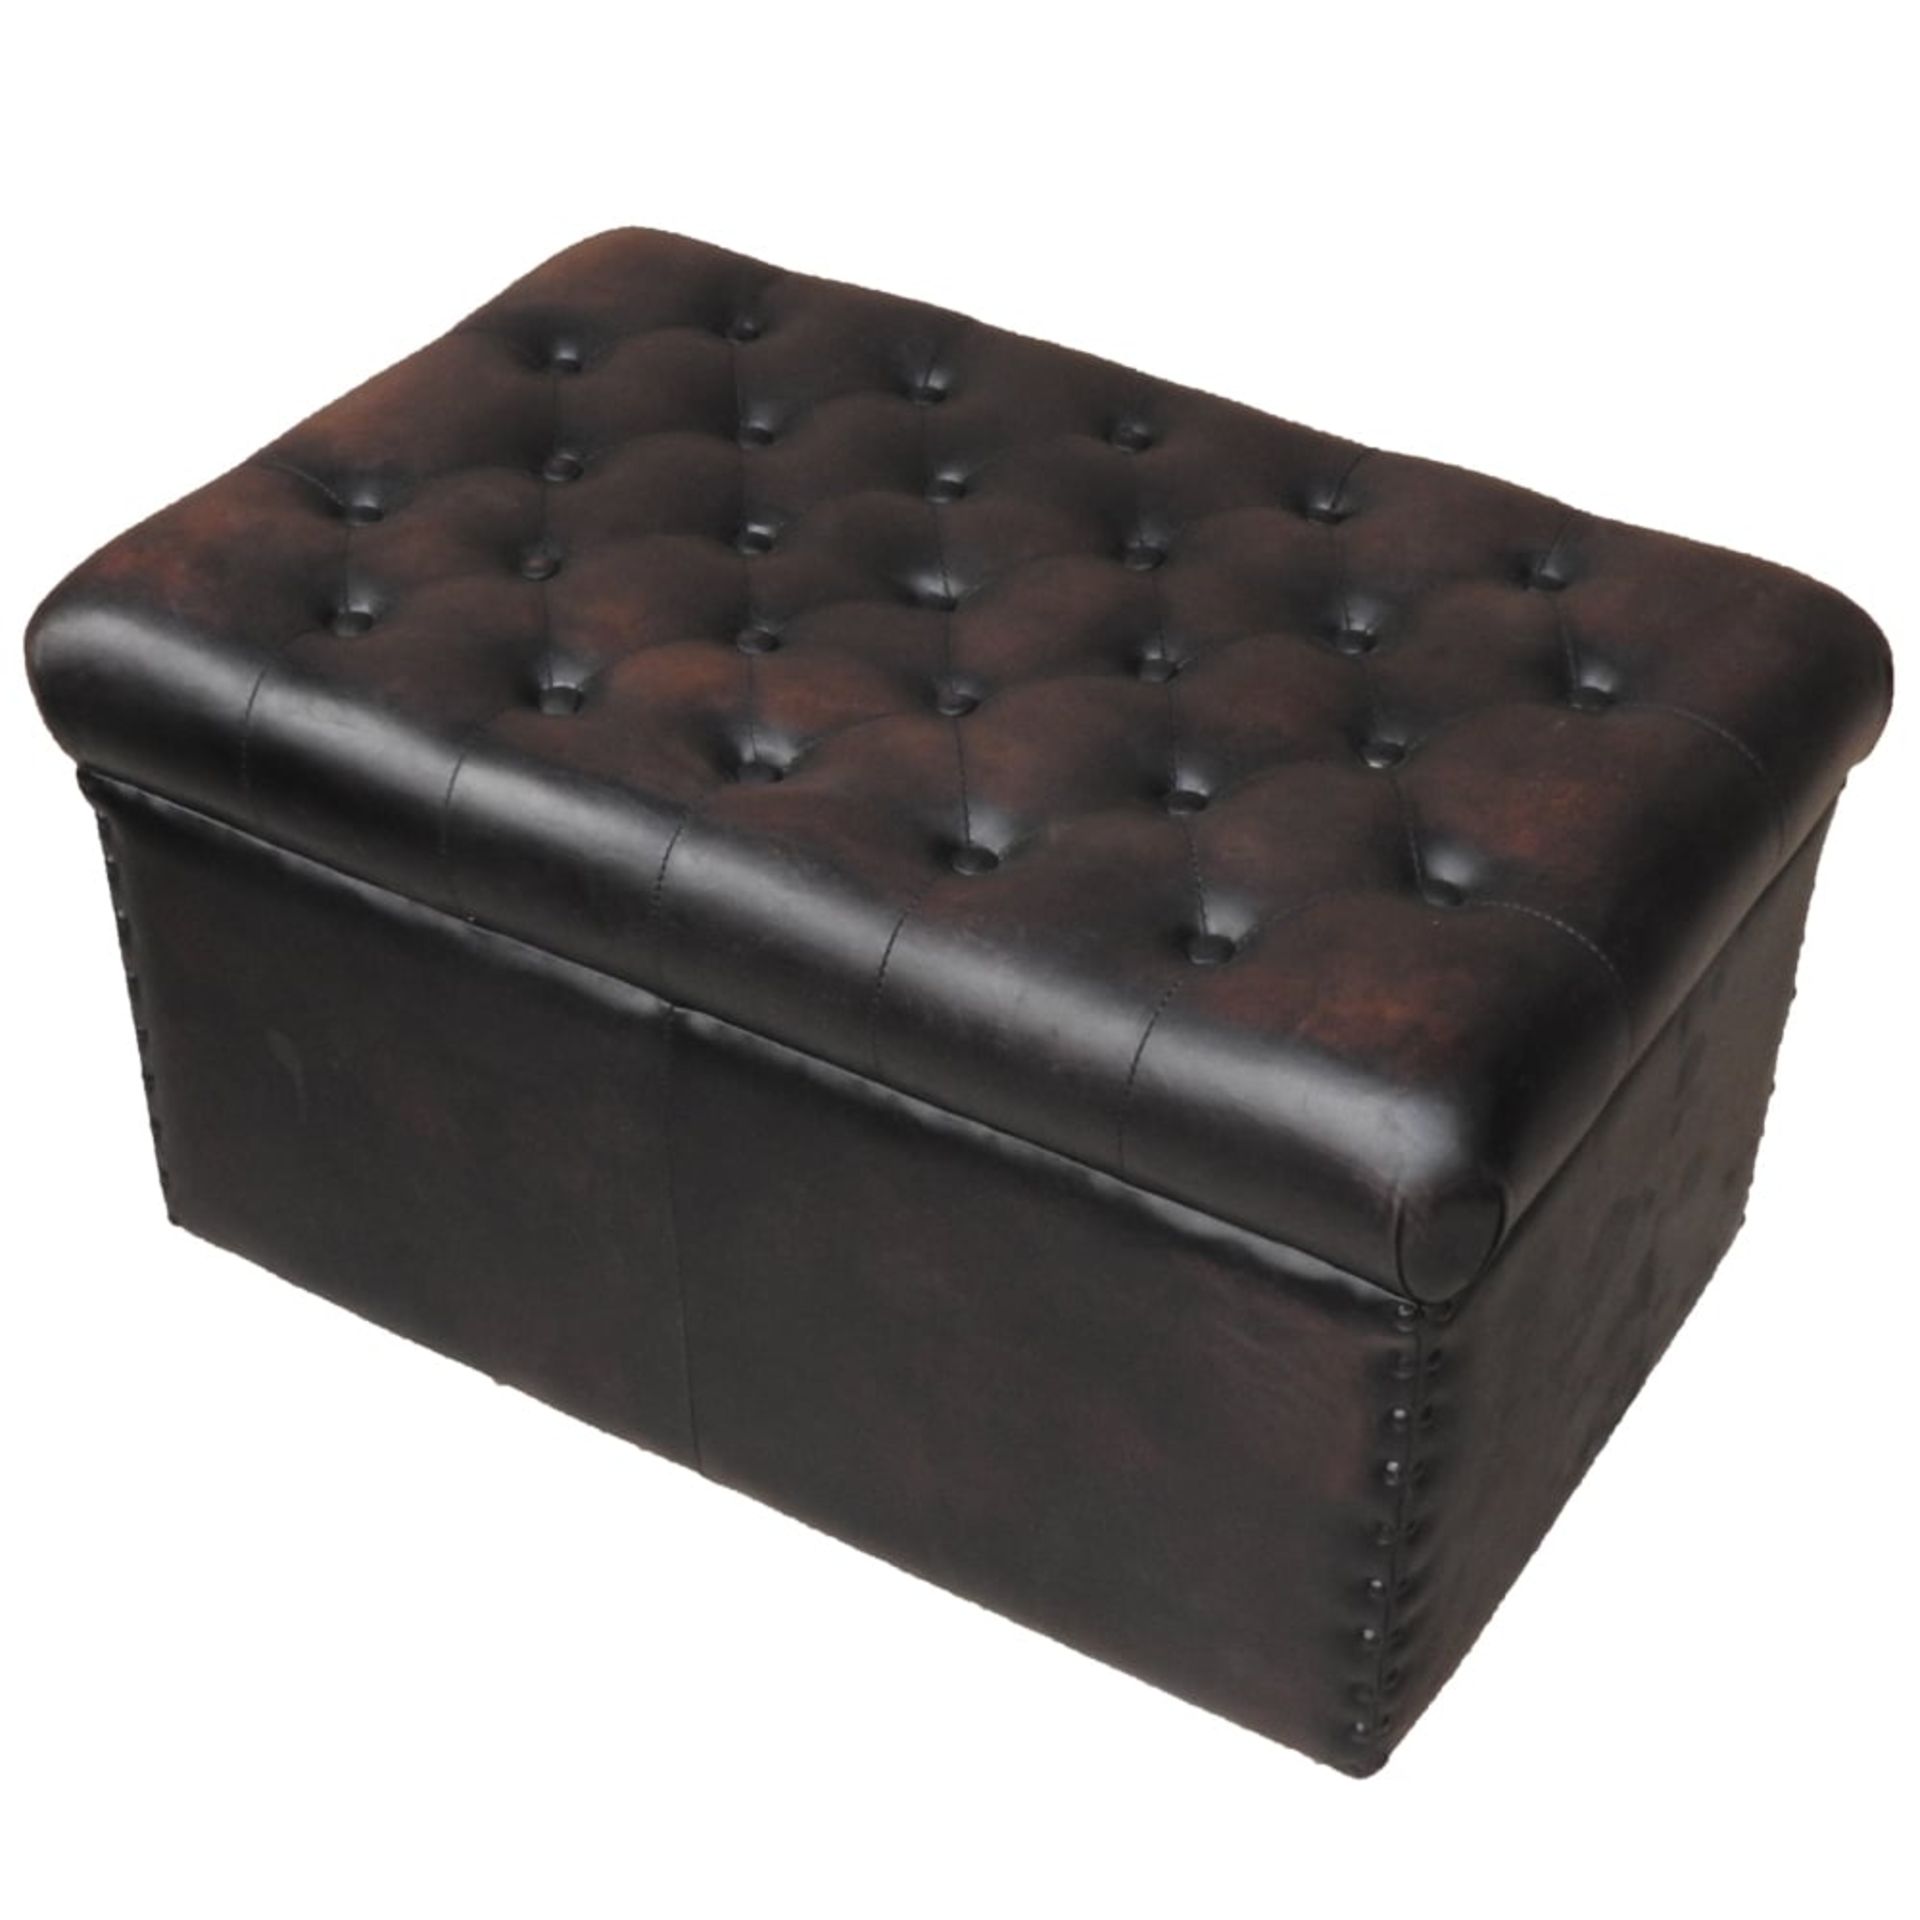 Leather Chesterfield Box Stool Handmade Chesterfield leather in a vintage finish.